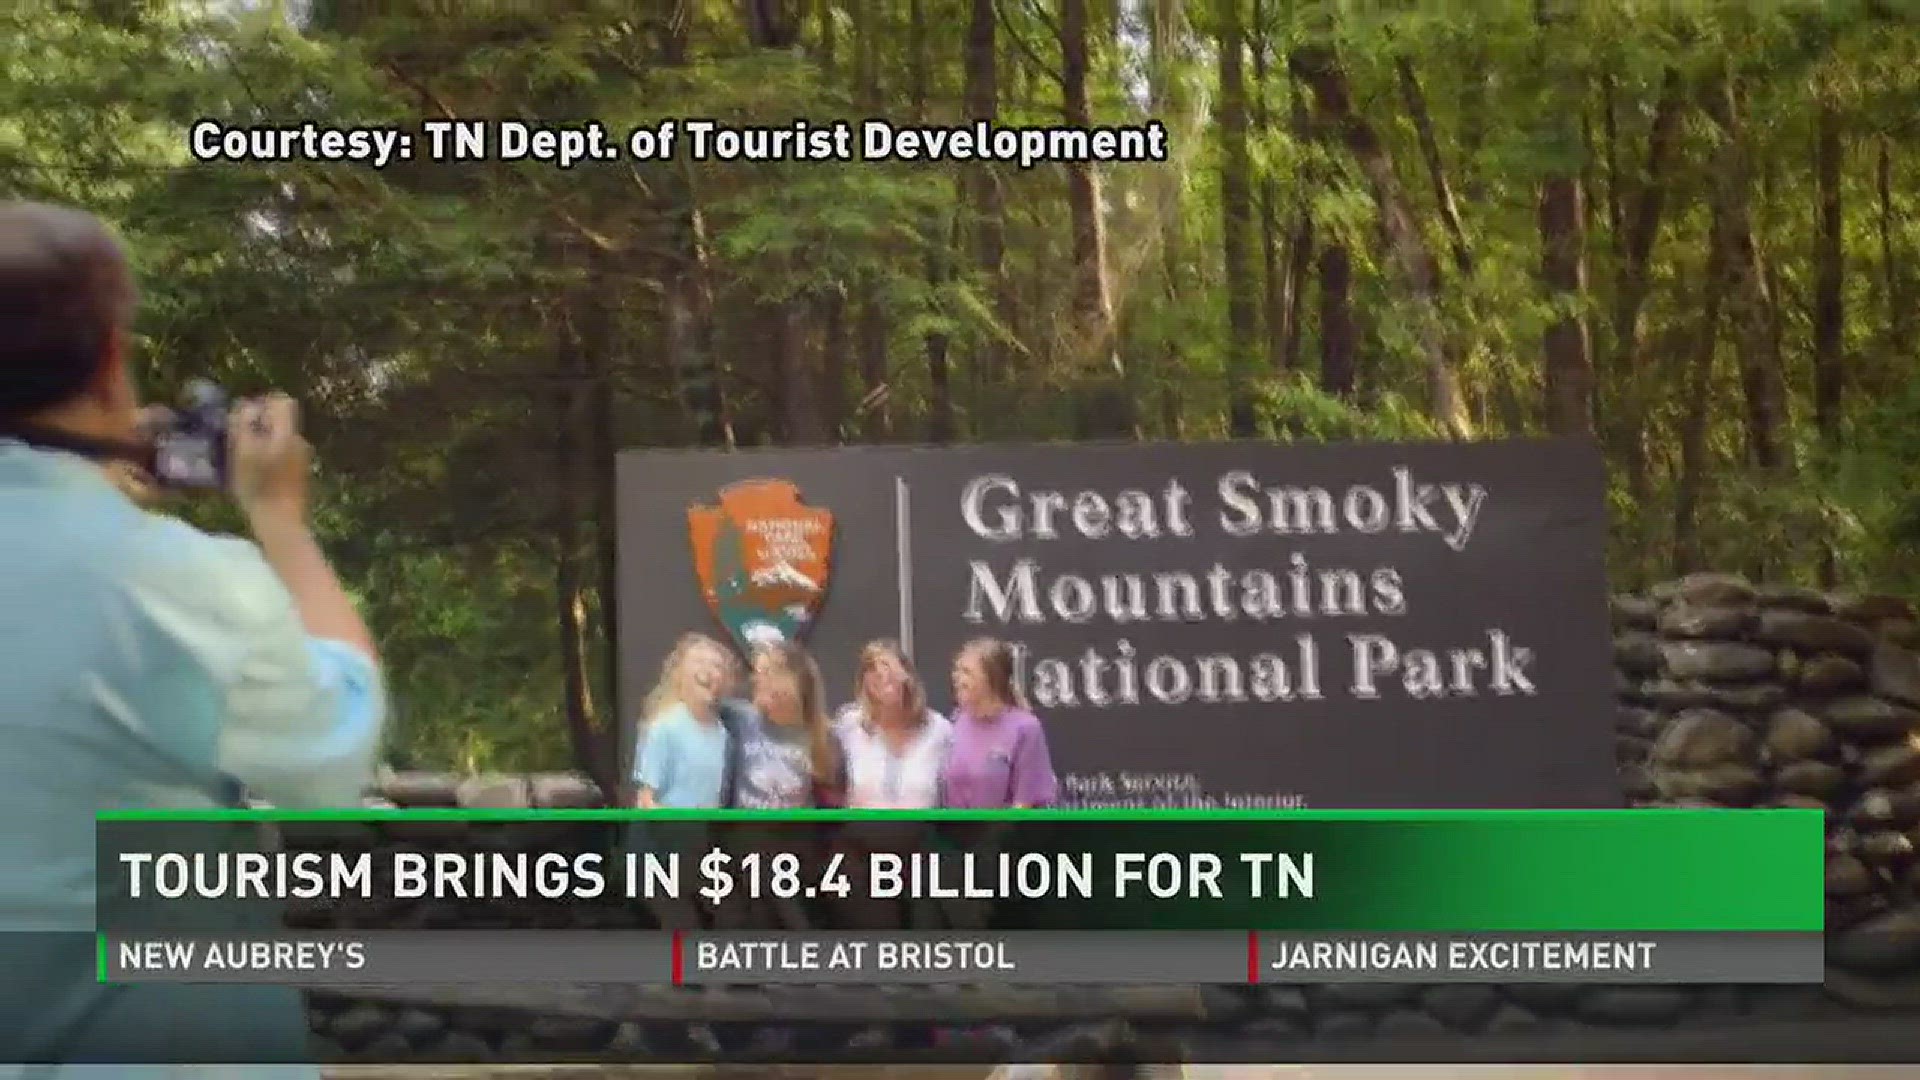 Tennessee Gov. Bill Haslam announced on Tuesday the state's tourism impact reached an all-time high of $18.4 billion in 2015.